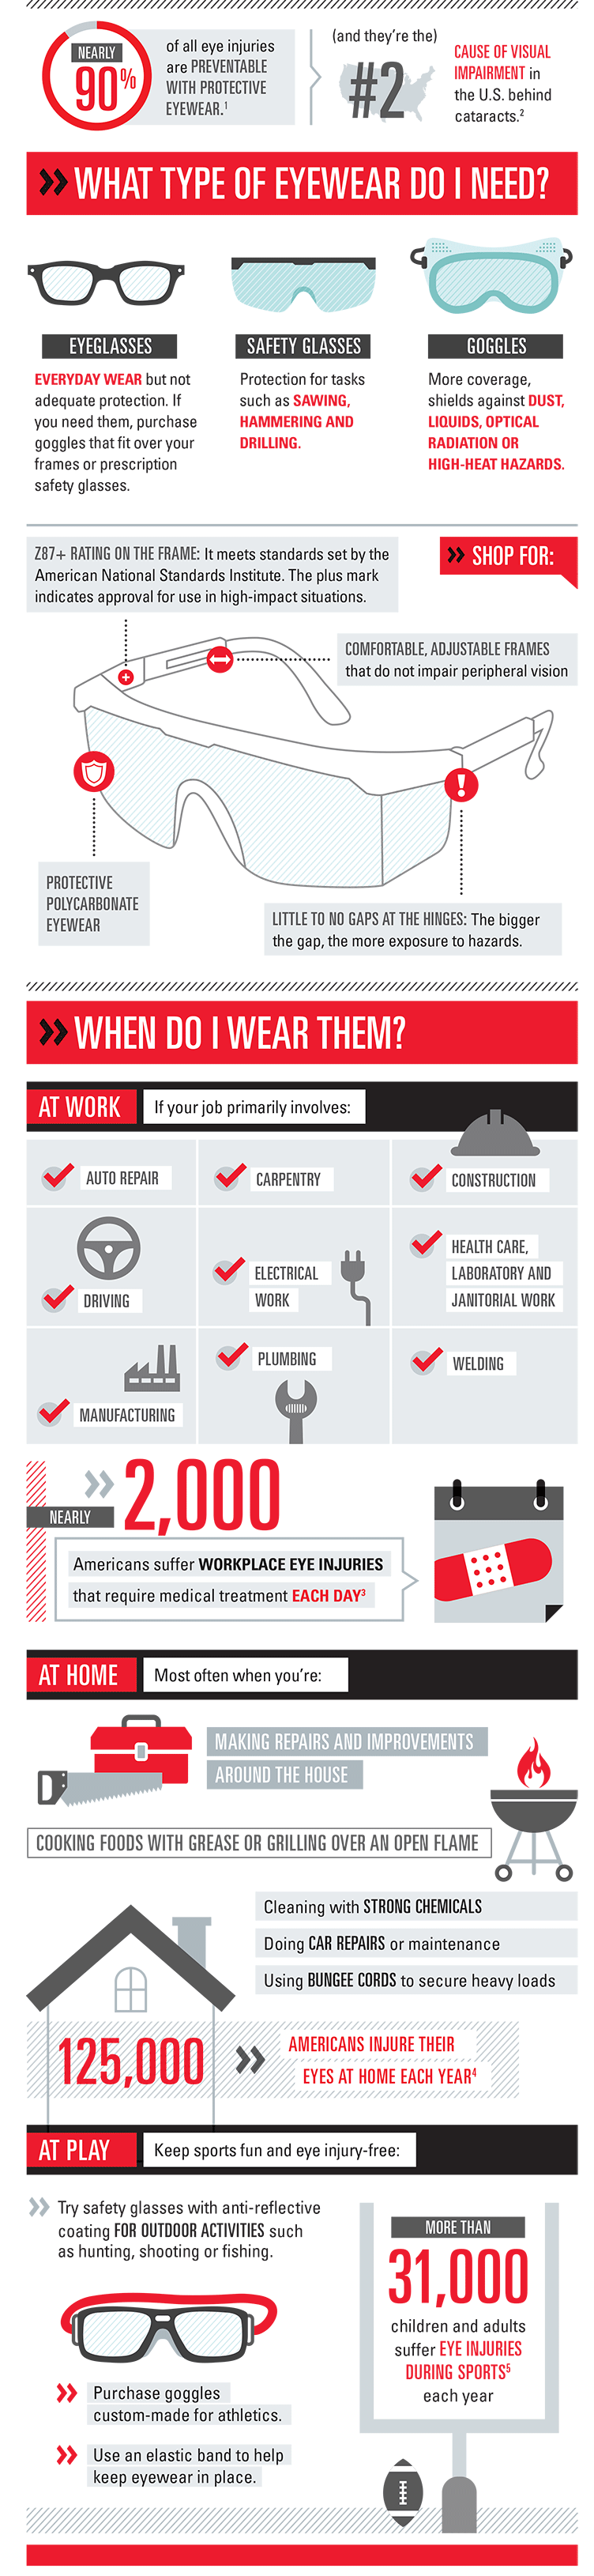 Why and how to wear safety glasses â€“ a full description of this infographic is available below.